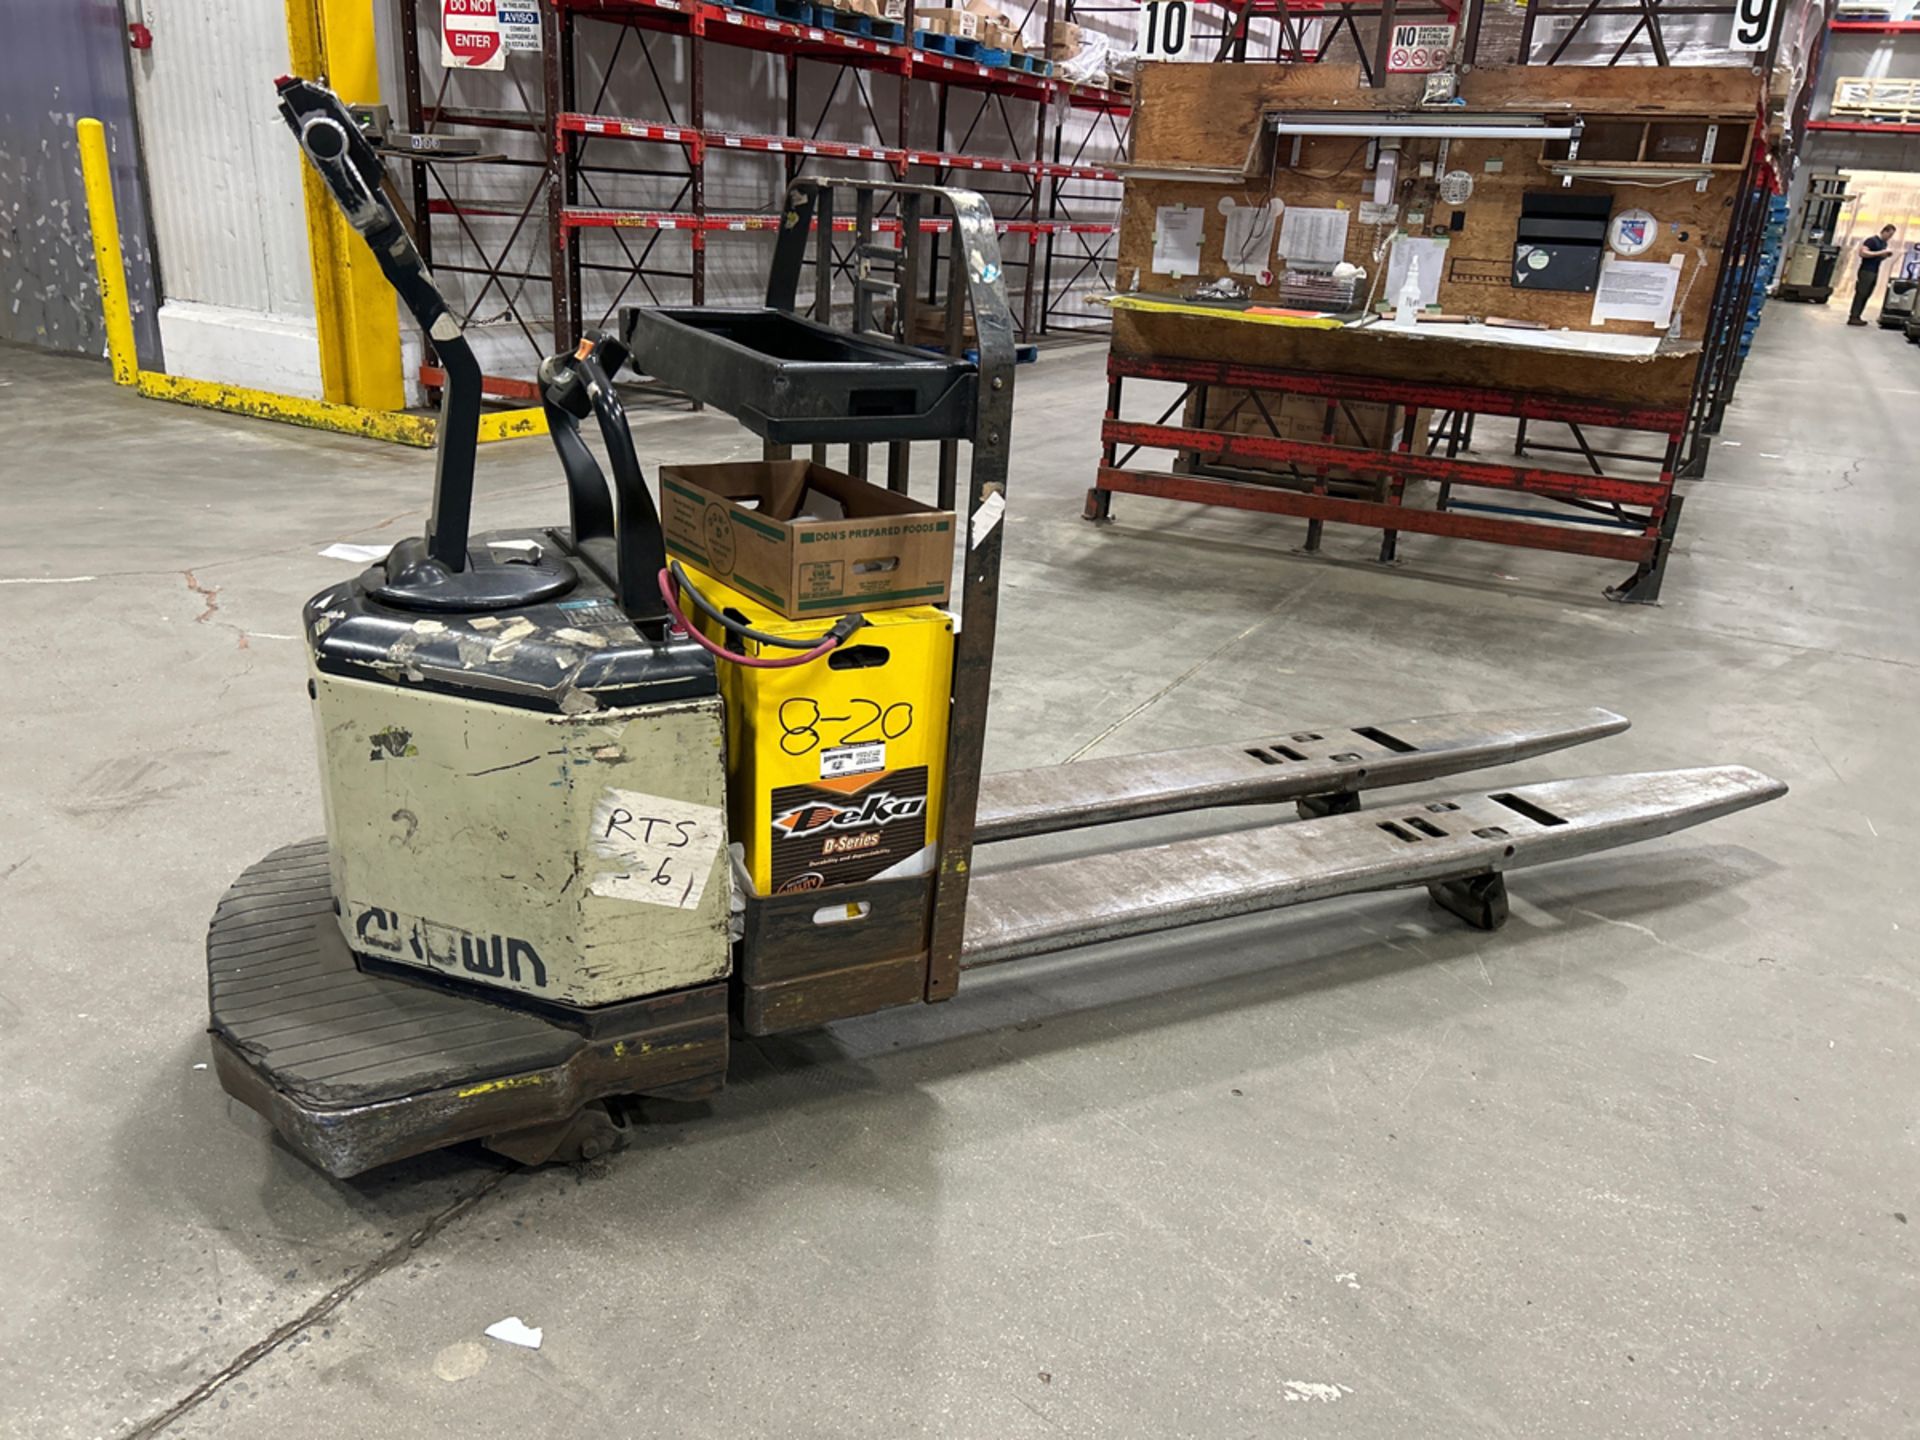 Crown PE3520-60 6,000lbs Electric 24V Rider Pallet Jack w/ Charger - Image 3 of 13